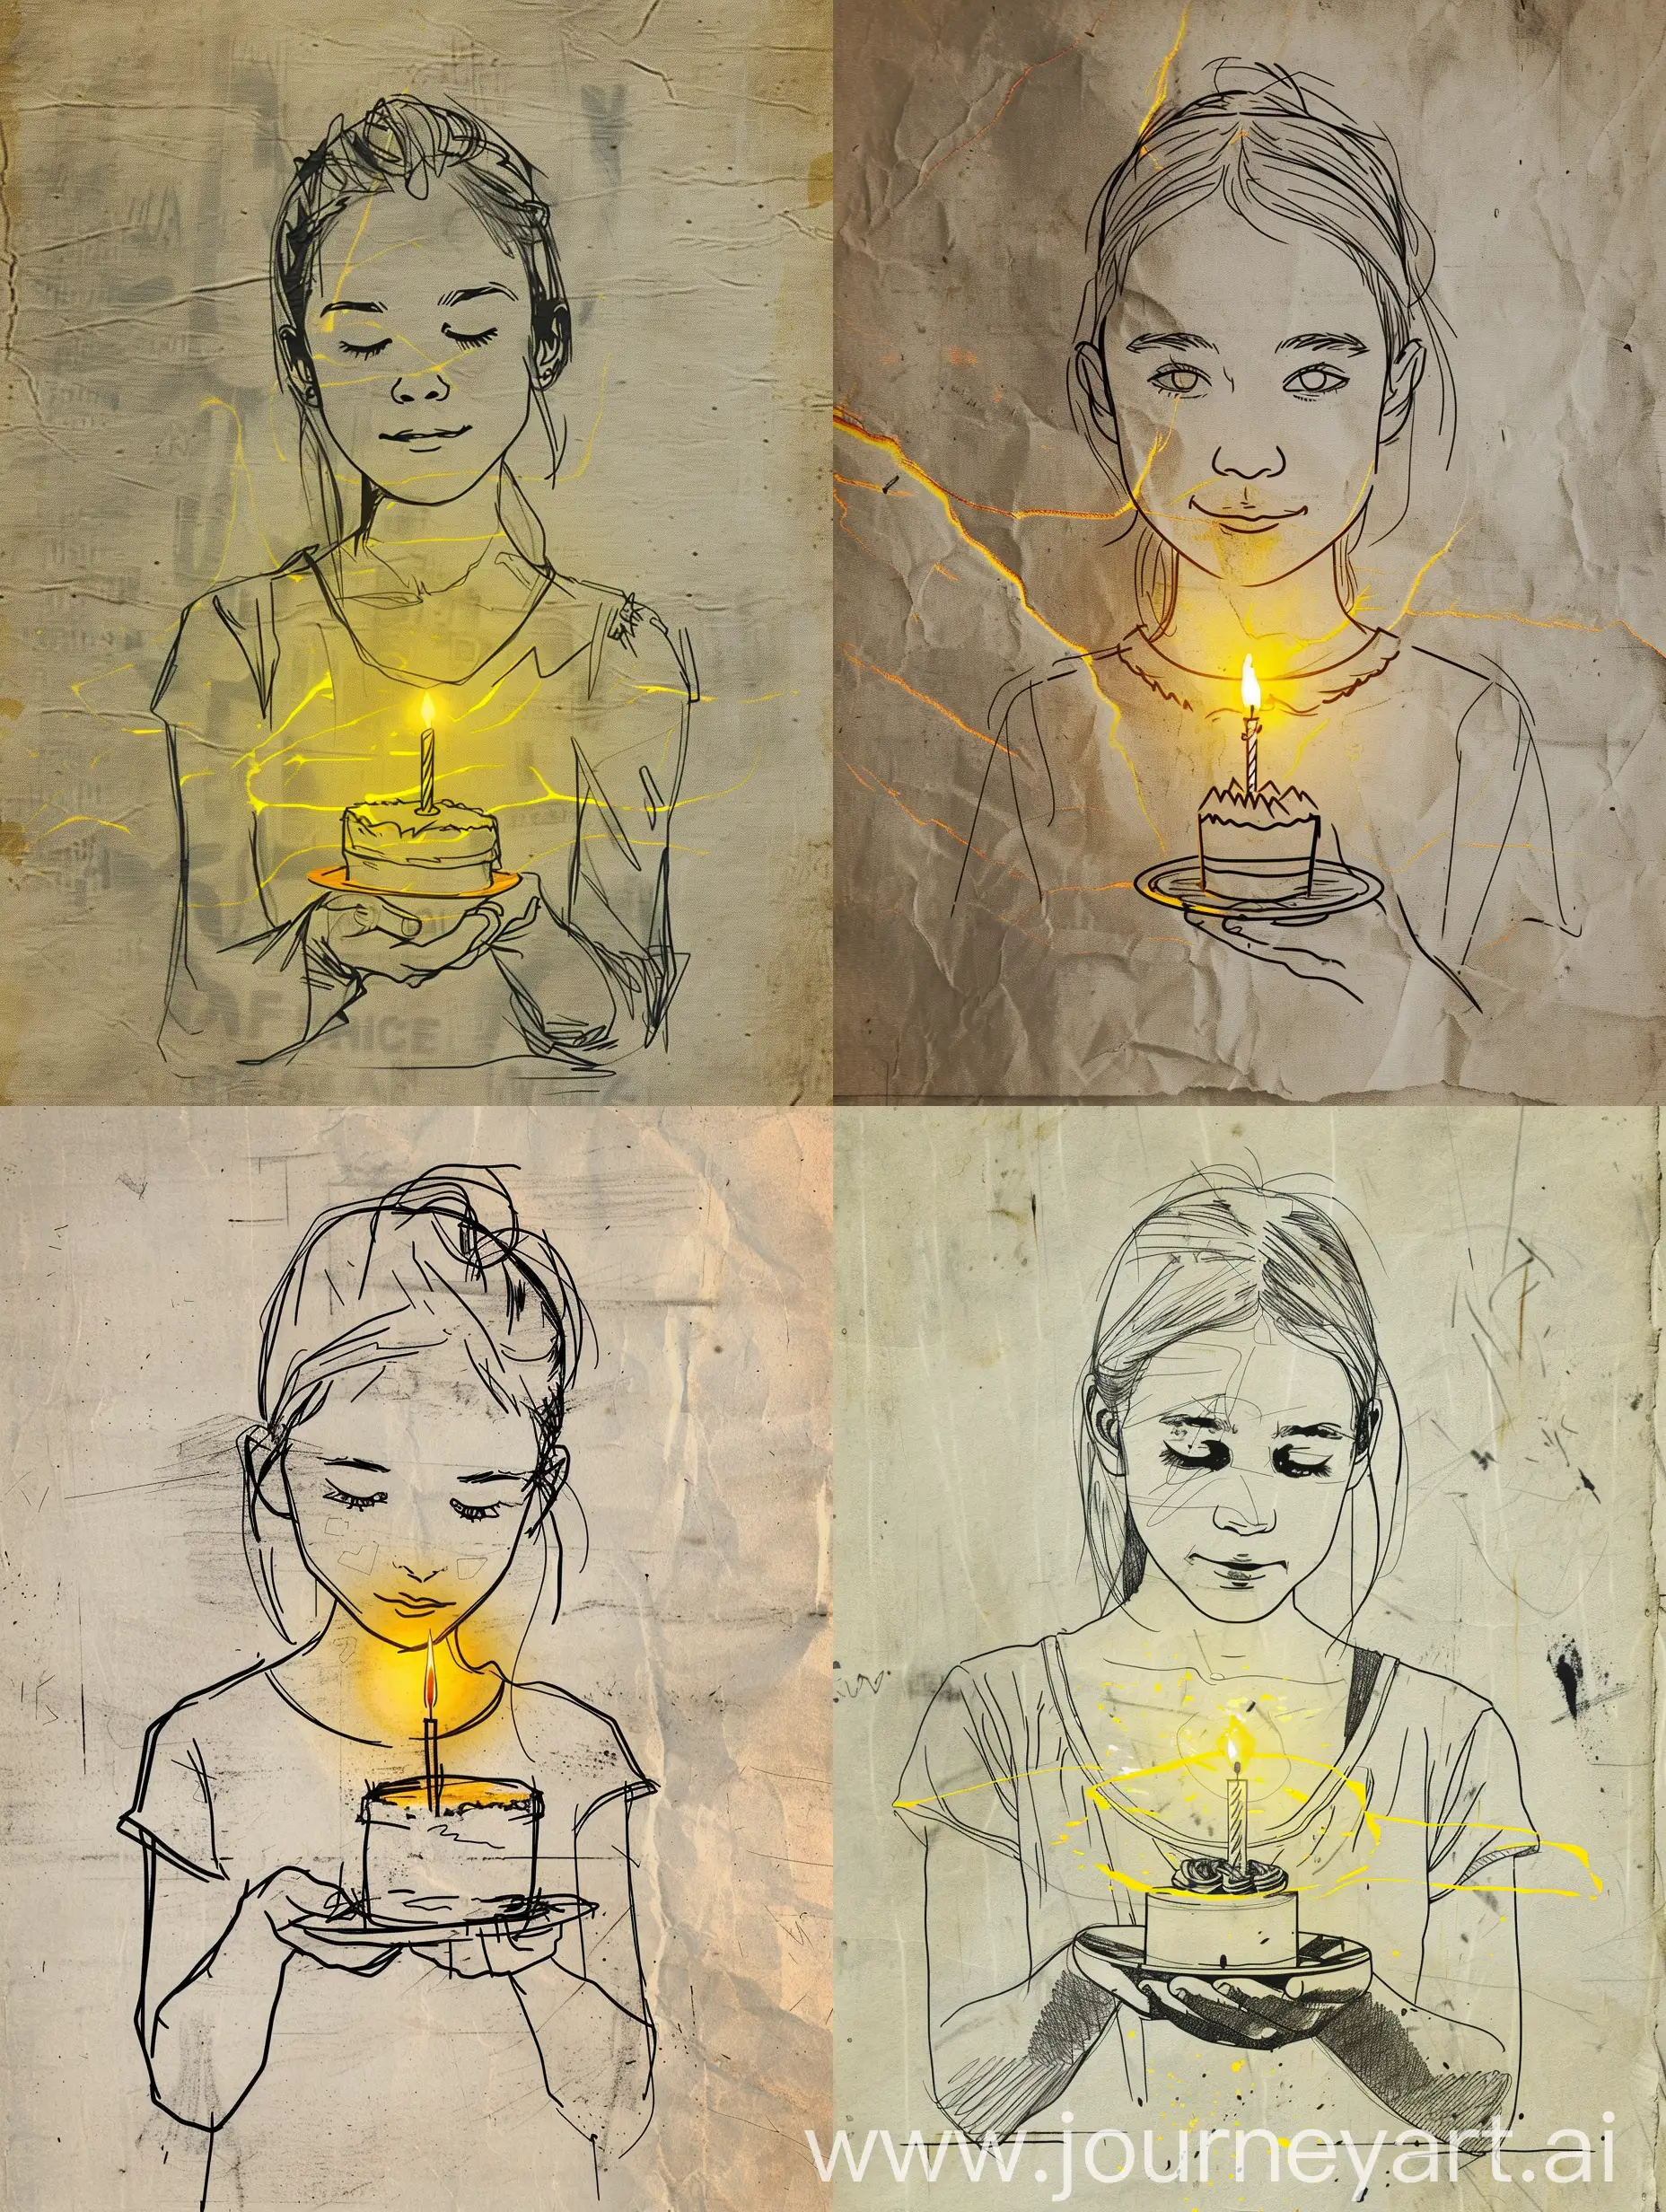 a very simple and minimalist outline sketch/line drawing portrait on old paper depicts a young girl holding a small cake with one lit candle on it. The yellow light from the candle illuminates her face in the drawing, creating the illusion of three-dimensional depth on the minimalist outline illustration. 